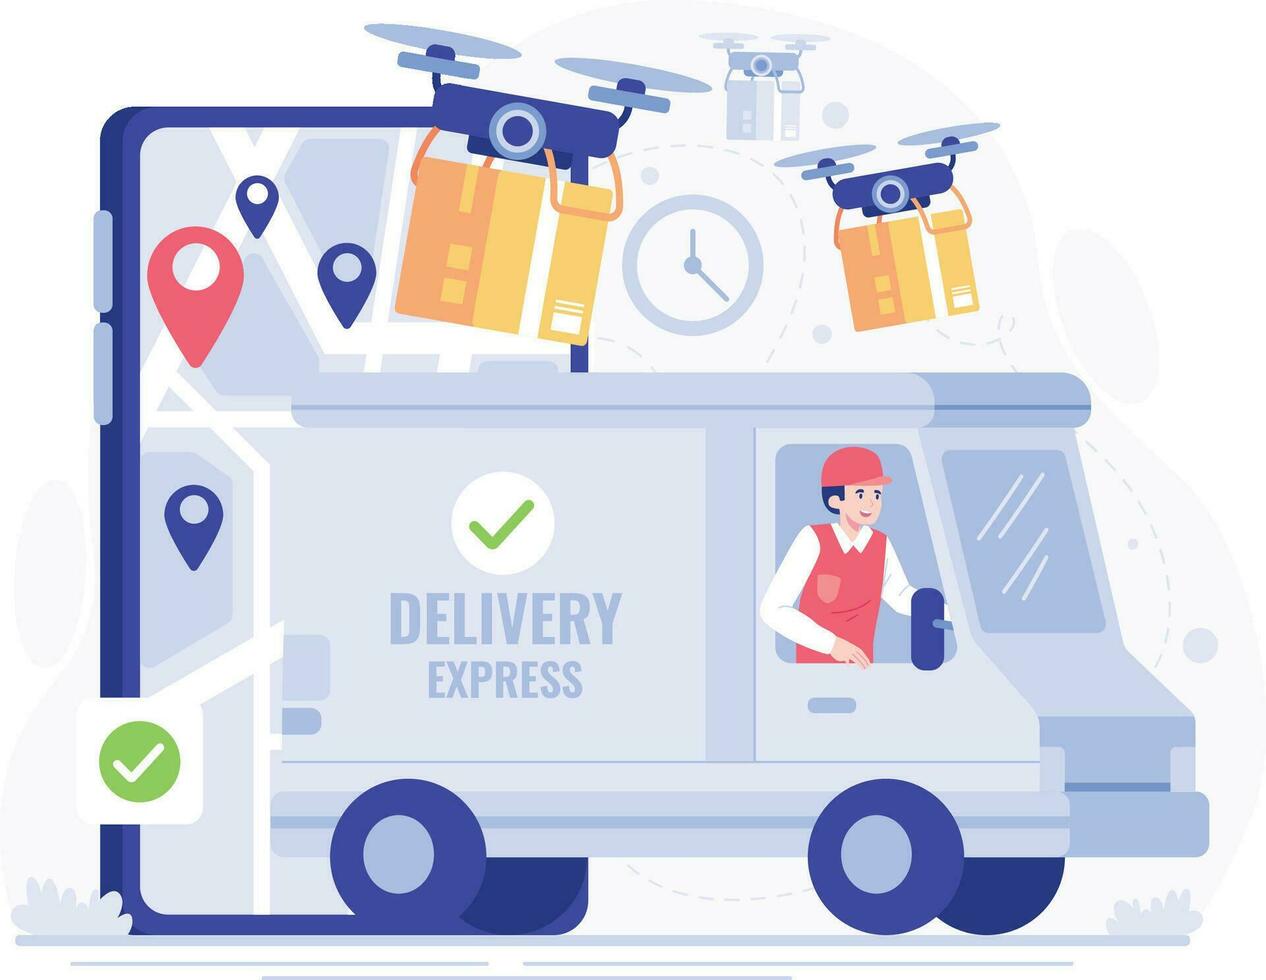 Delivery service concept. Vector illustration in flat style. Online order tracking. For shipping, modern technology, artificial intelligence technology concept.